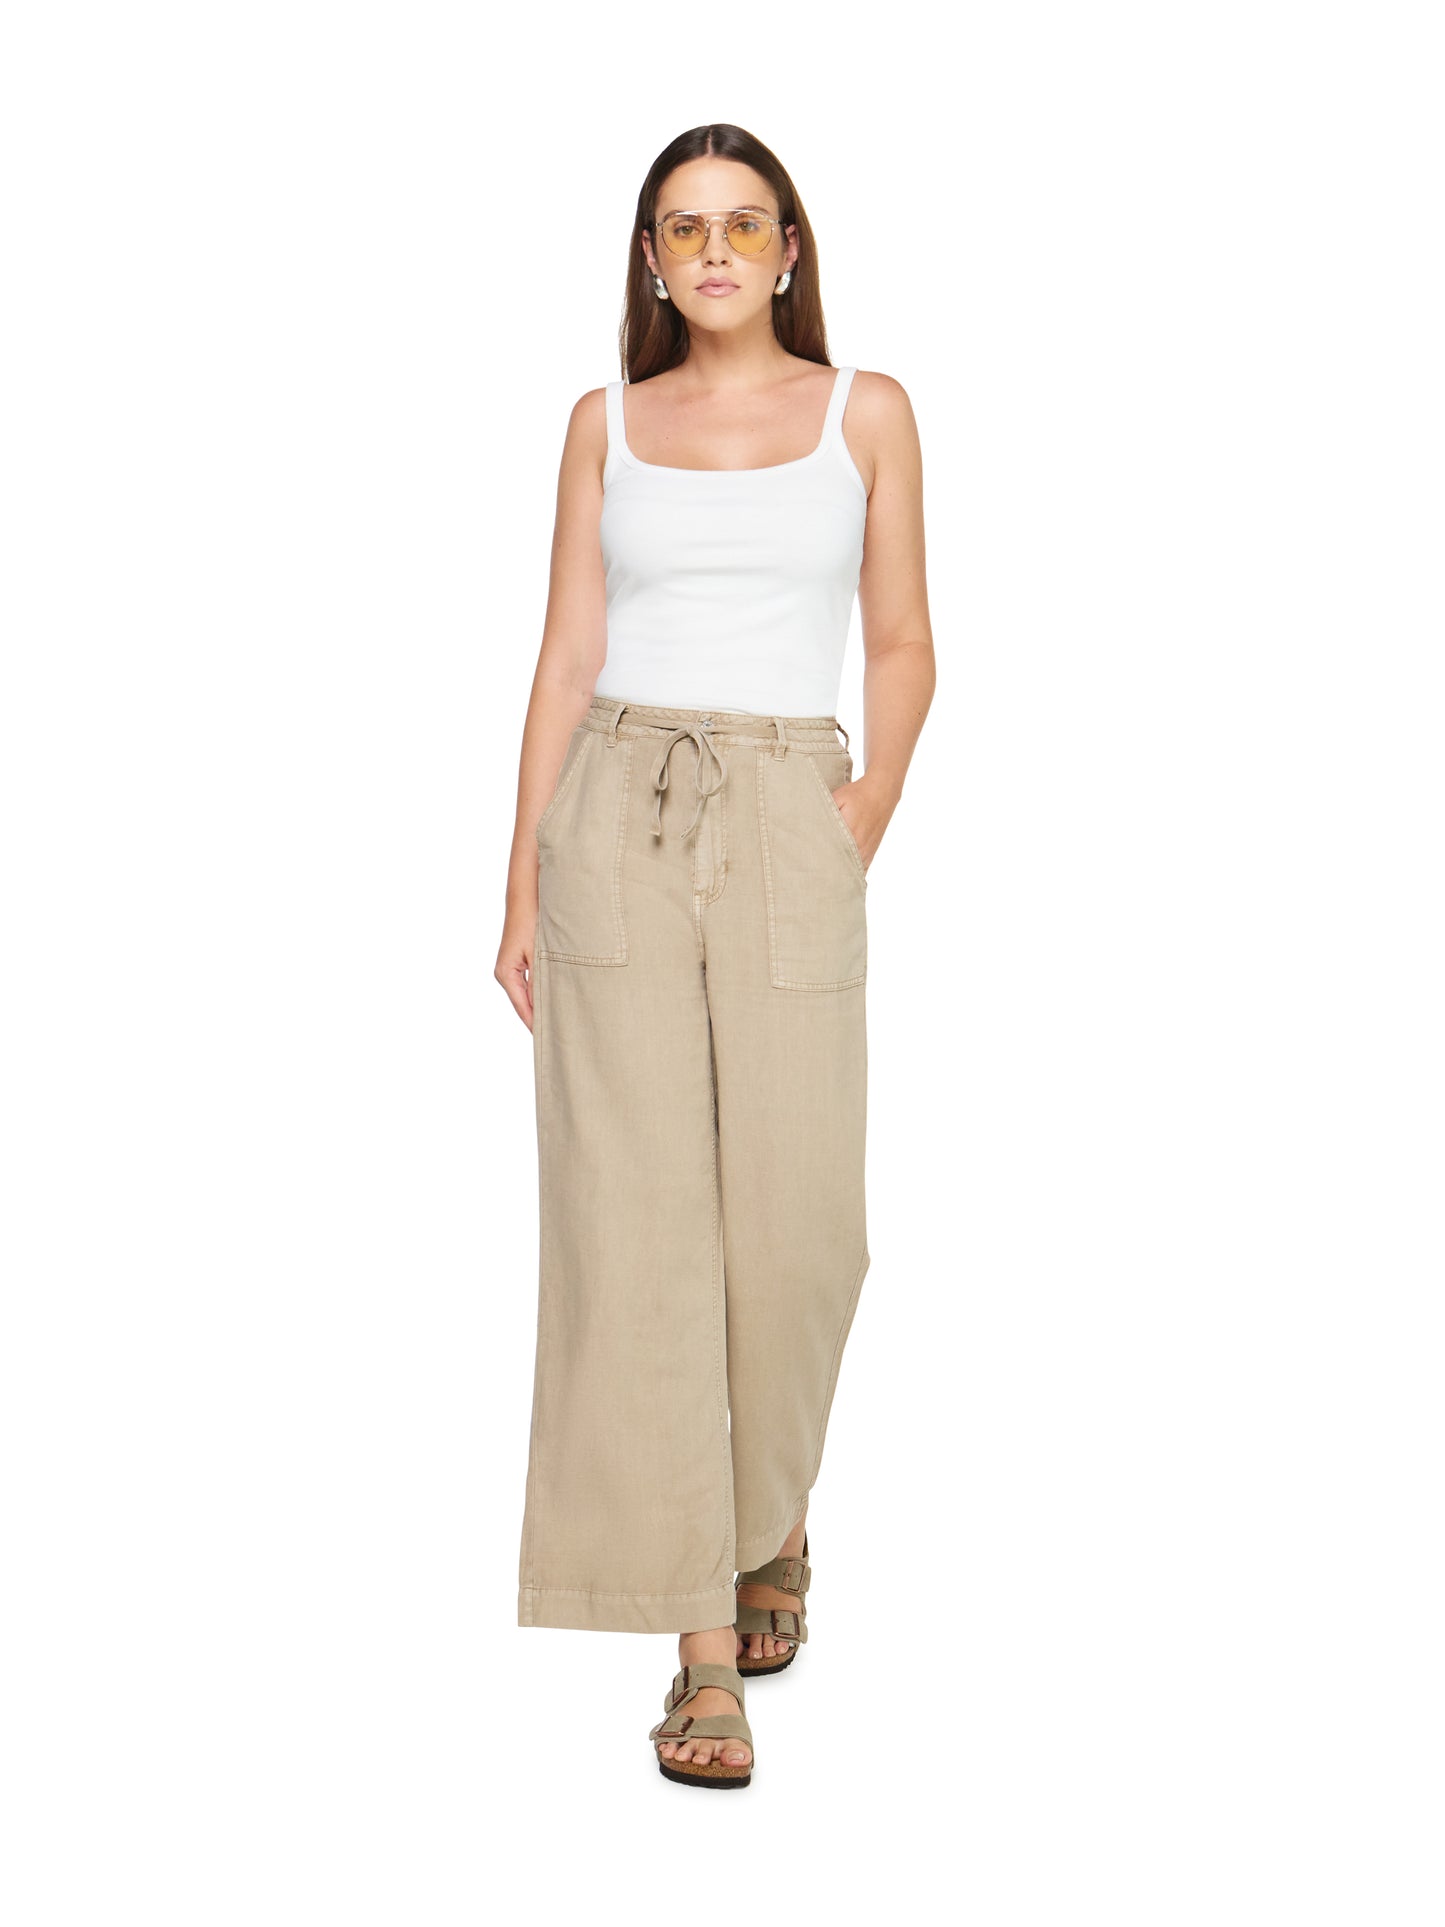 Articles of Society Emme Linen Soft Pant